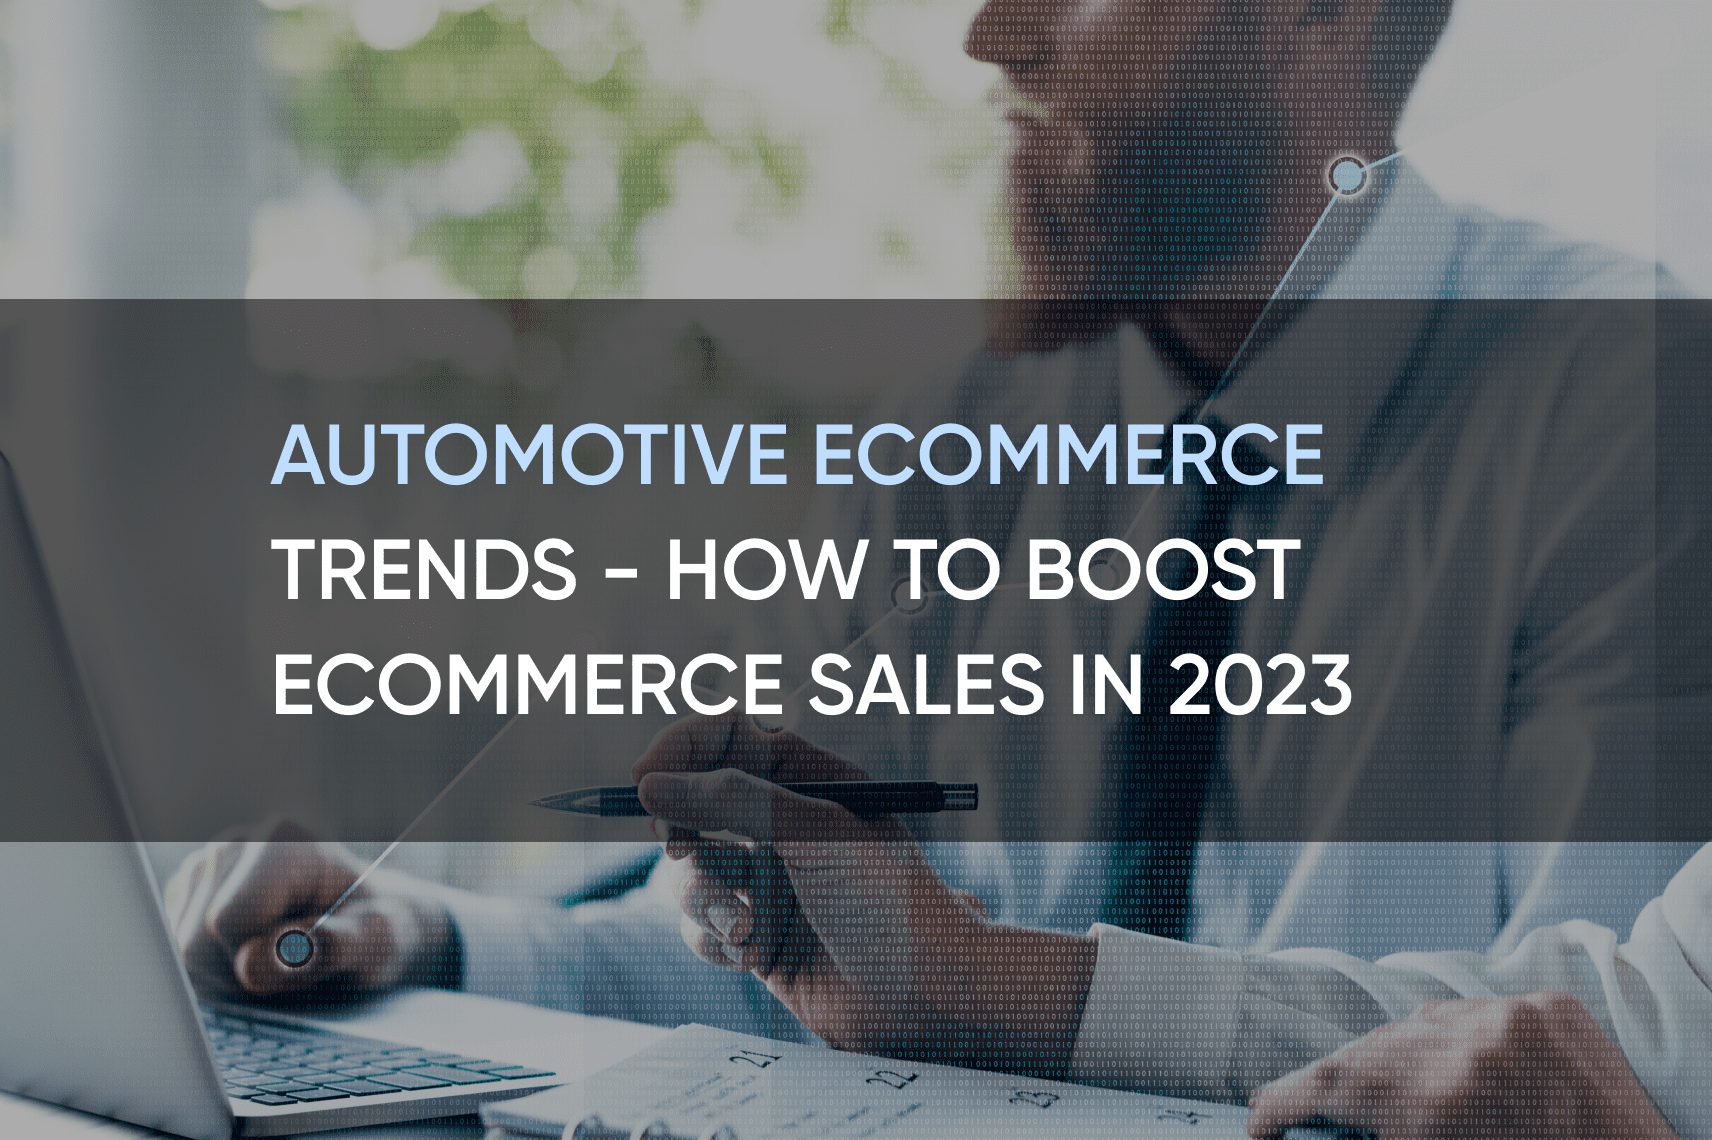 Automotive eCommerce Trends - How to Boost eCommerce Sales in 2023 | SolidBrain